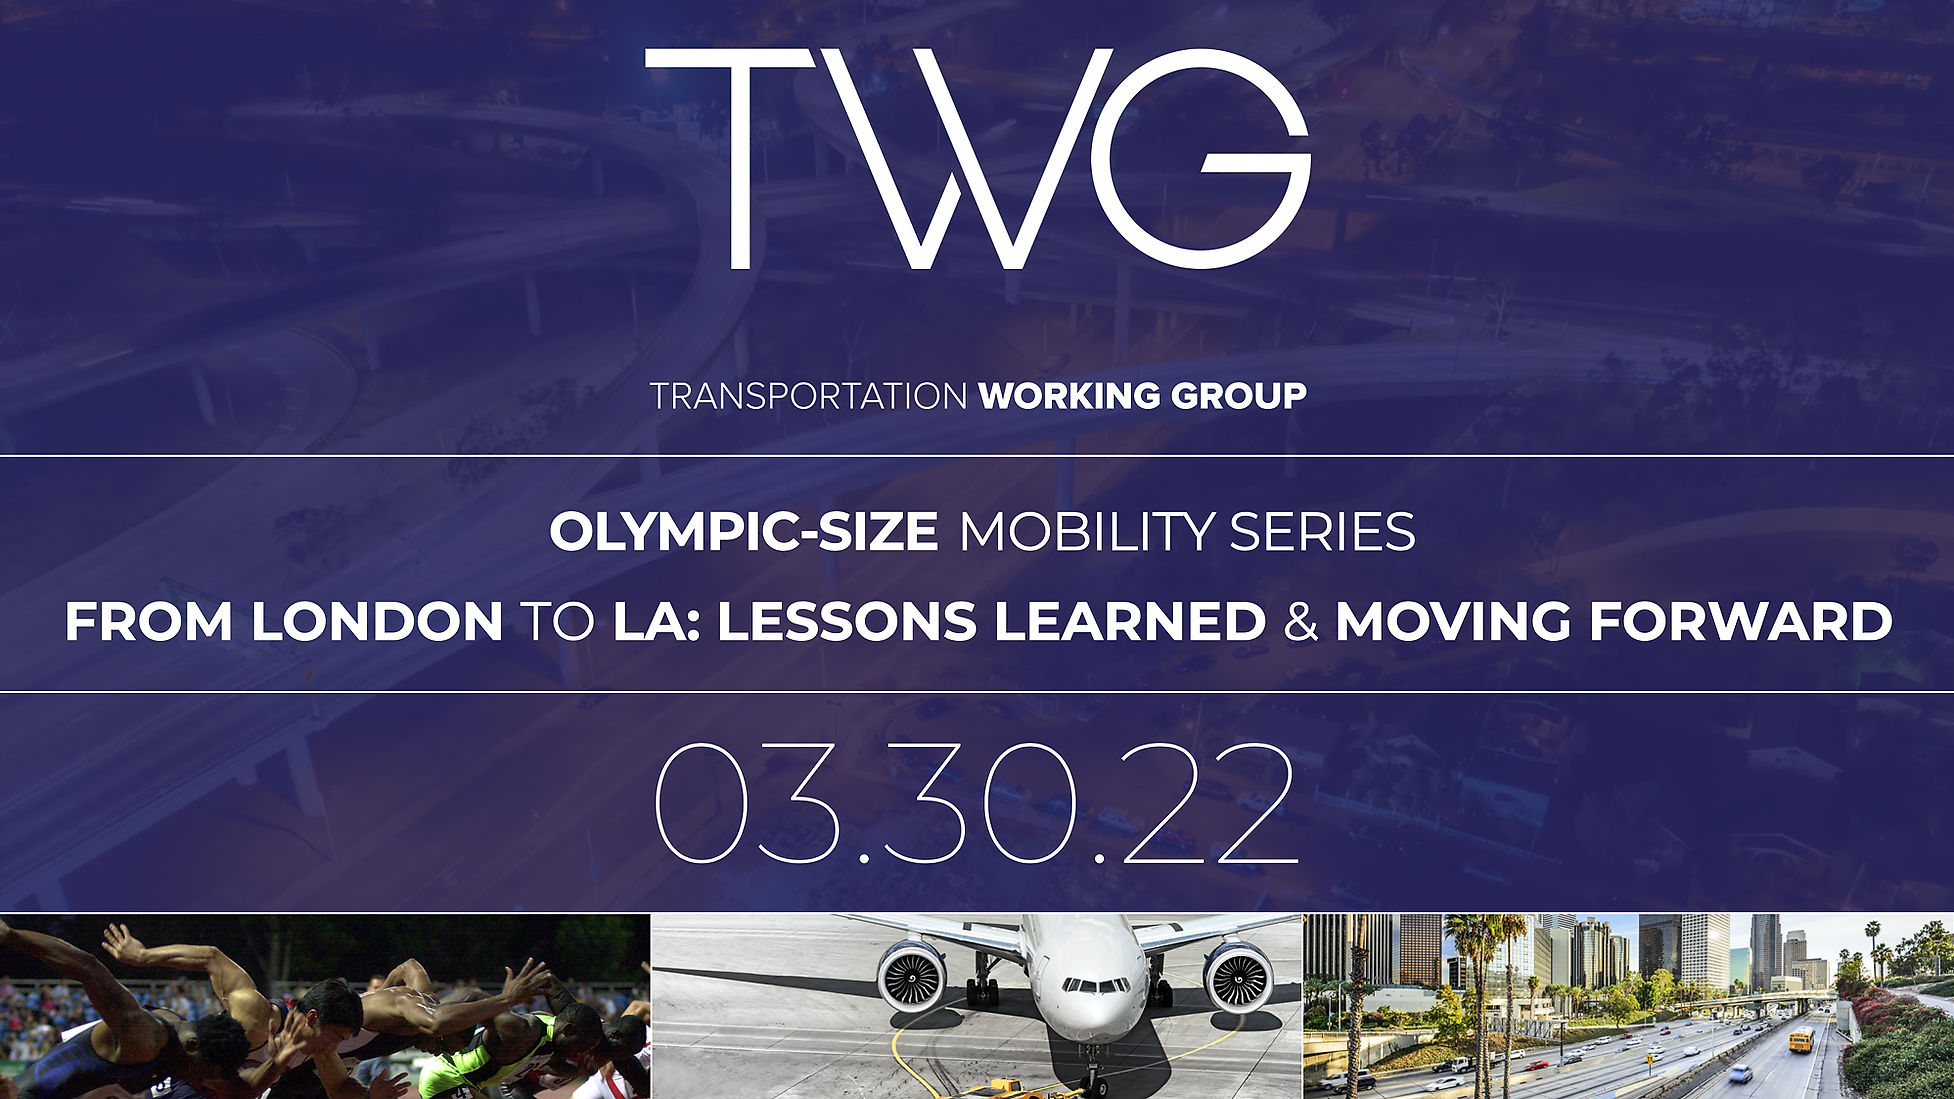 Transportation Working Group (TWG) / FROM LONDON TO LA: Lessons Learned & Moving Forward / 03.30.22